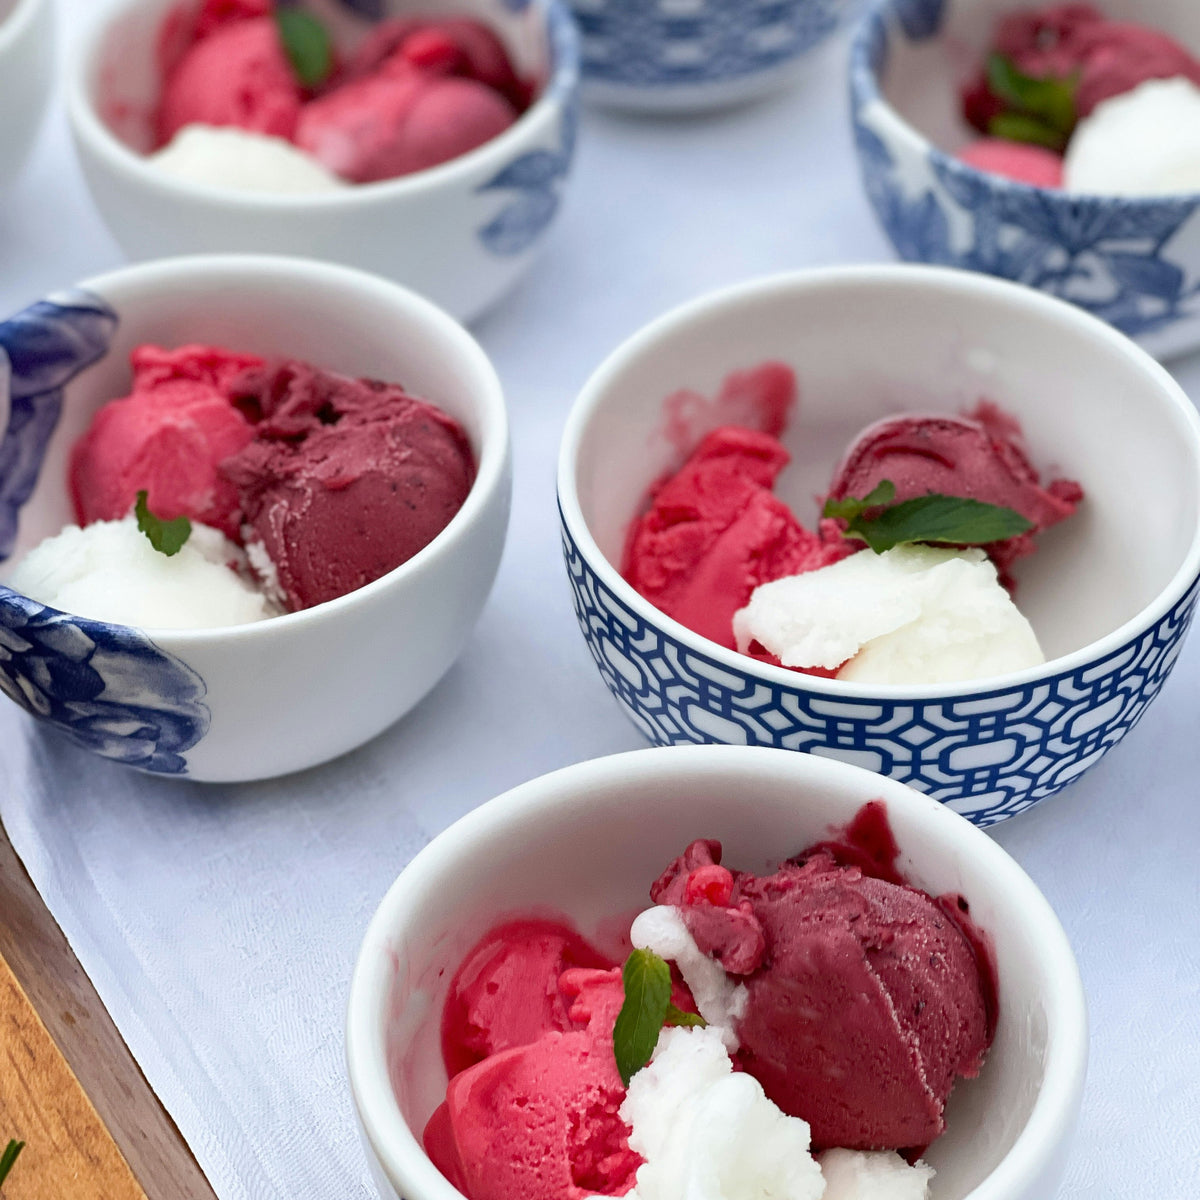 Four Newport Snack Bowls of ice cream topped with berries and mint.